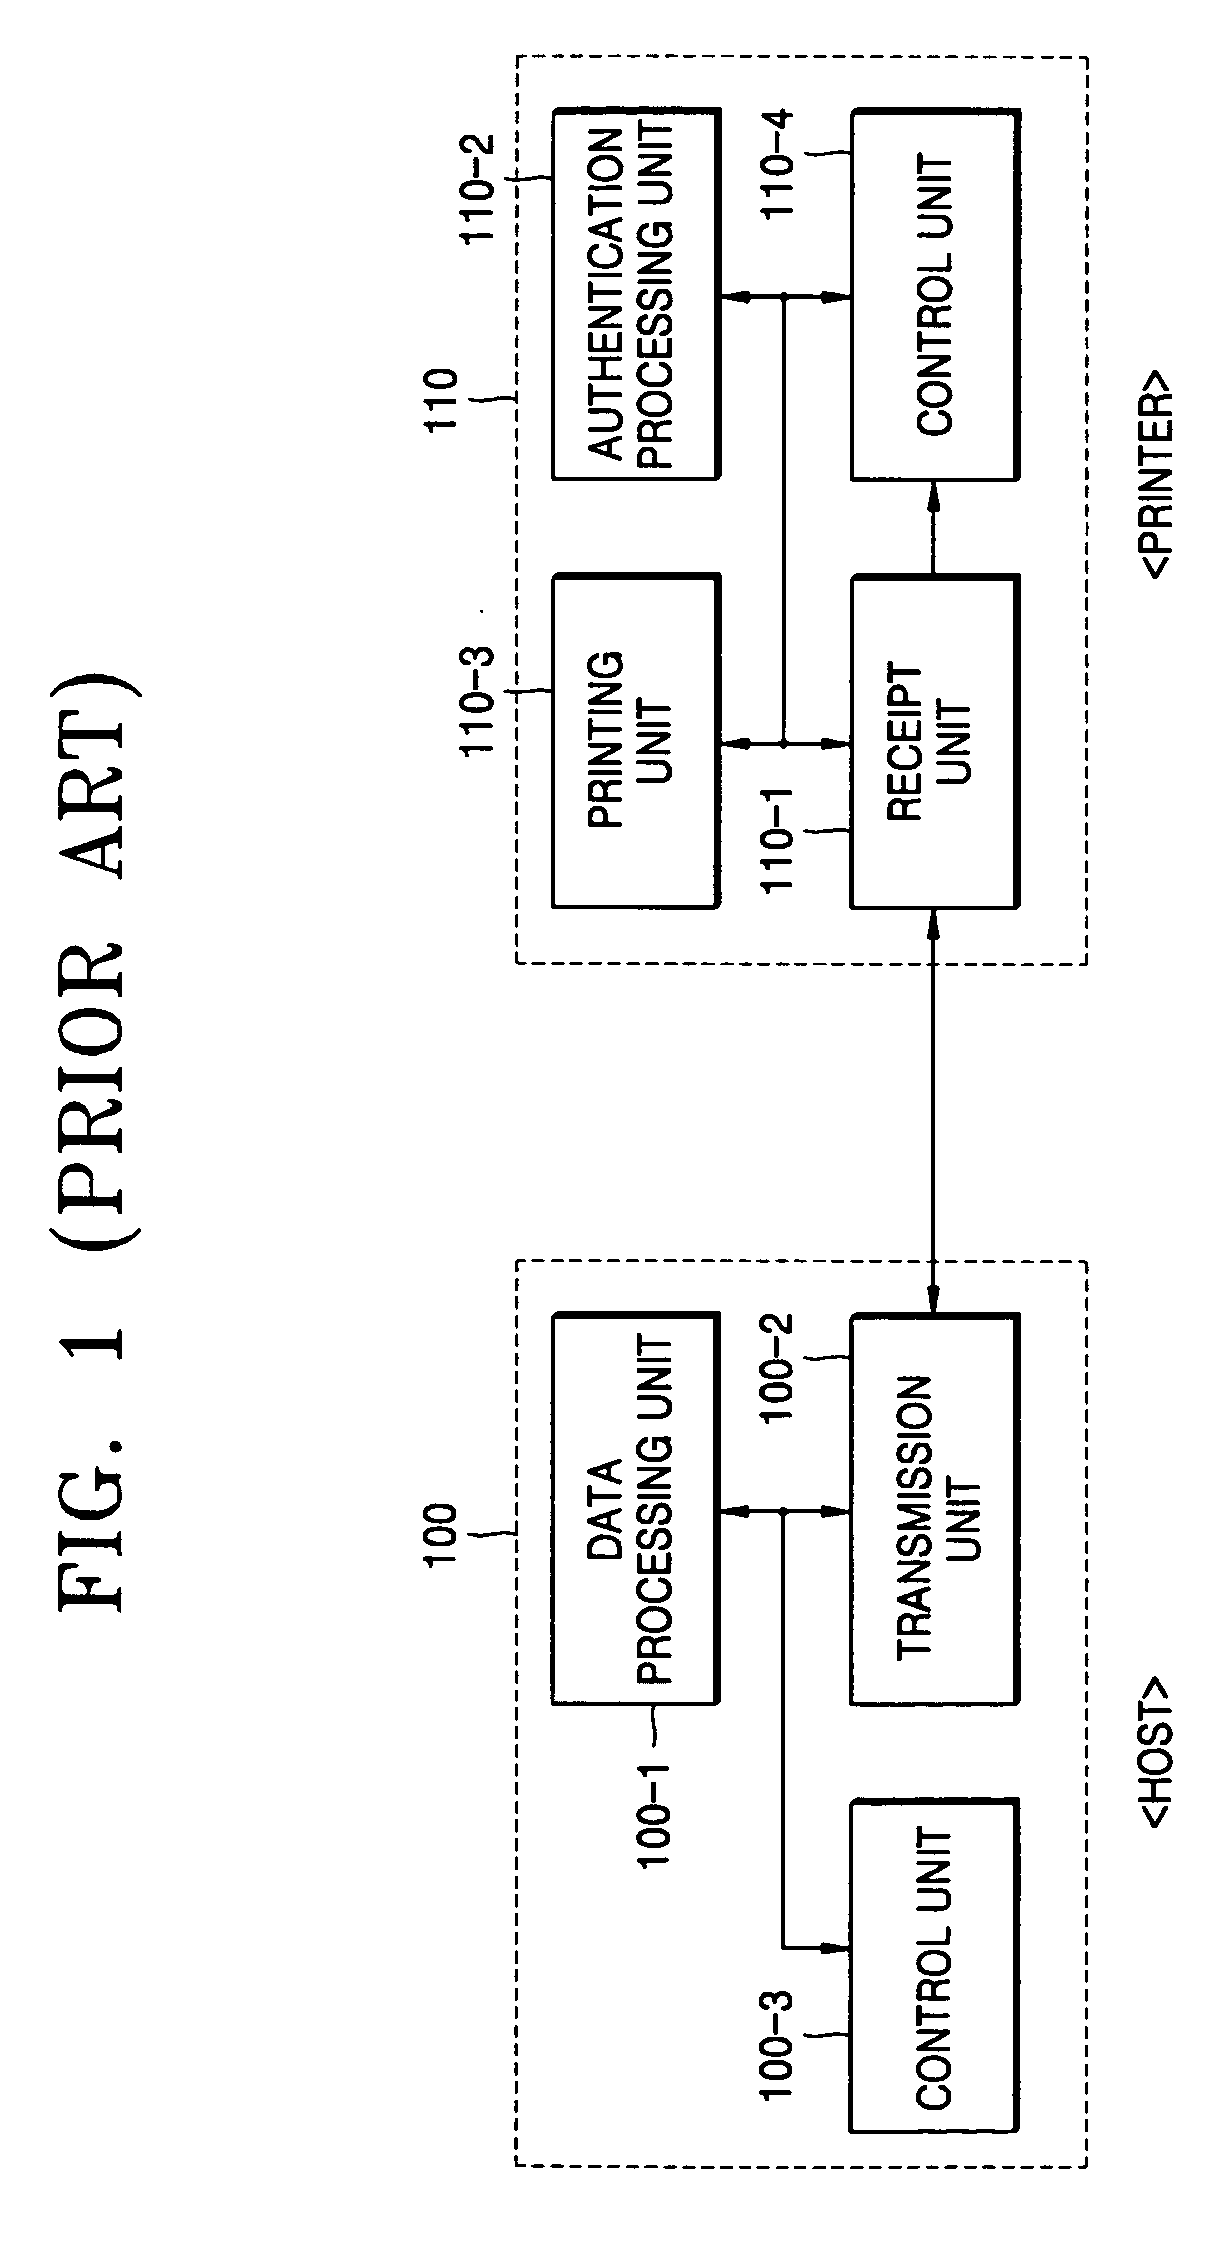 Printing system and method that support security function